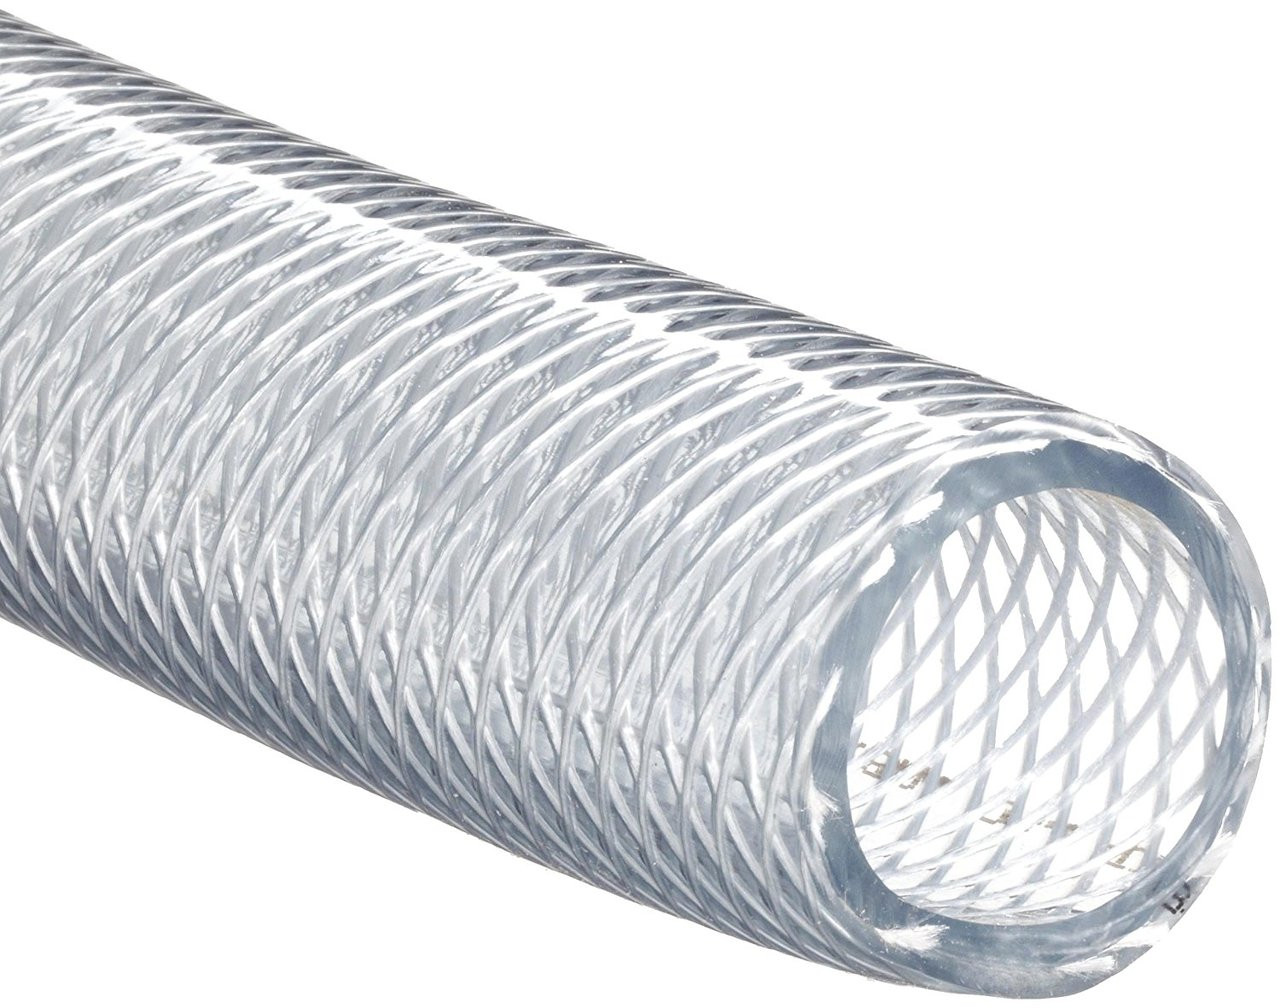 Clear Braided RV Fresh Water Vinyl Tubing / Hose - 3/8 - Sold by the foot